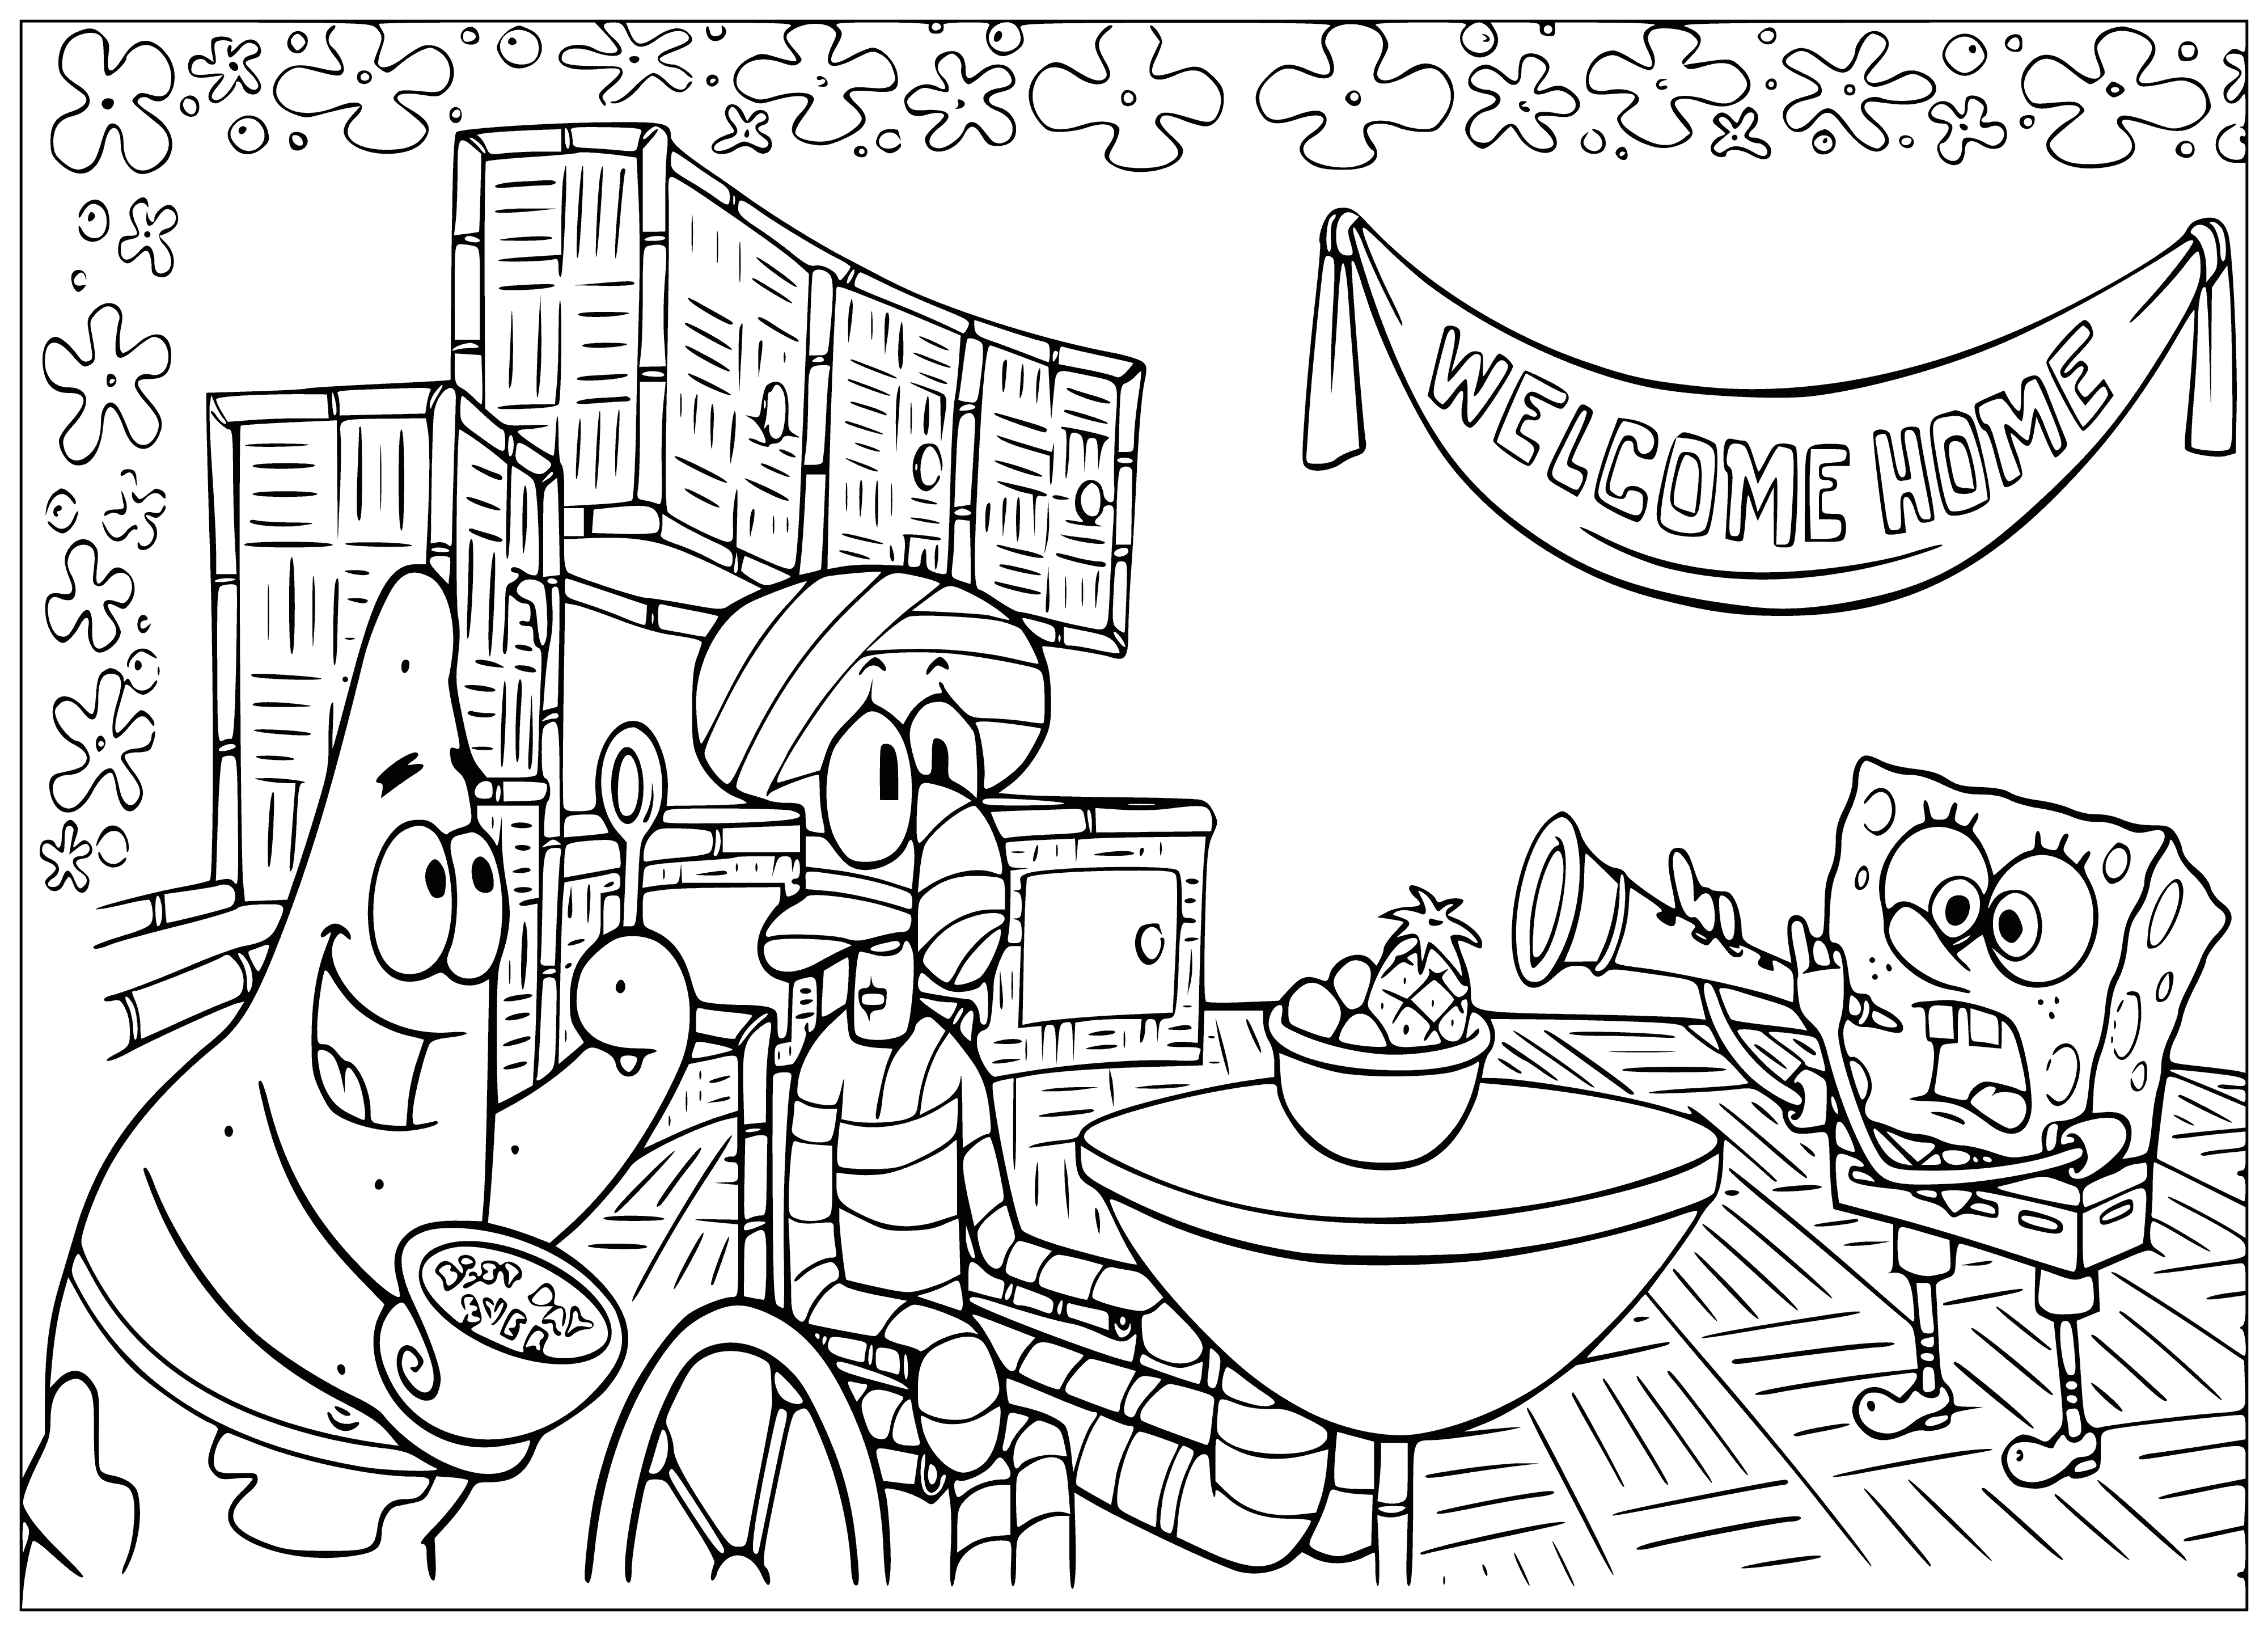 coloring page: SpongeBob hosts a party: all his friends are laughing, having a great time - it's the life of the party!